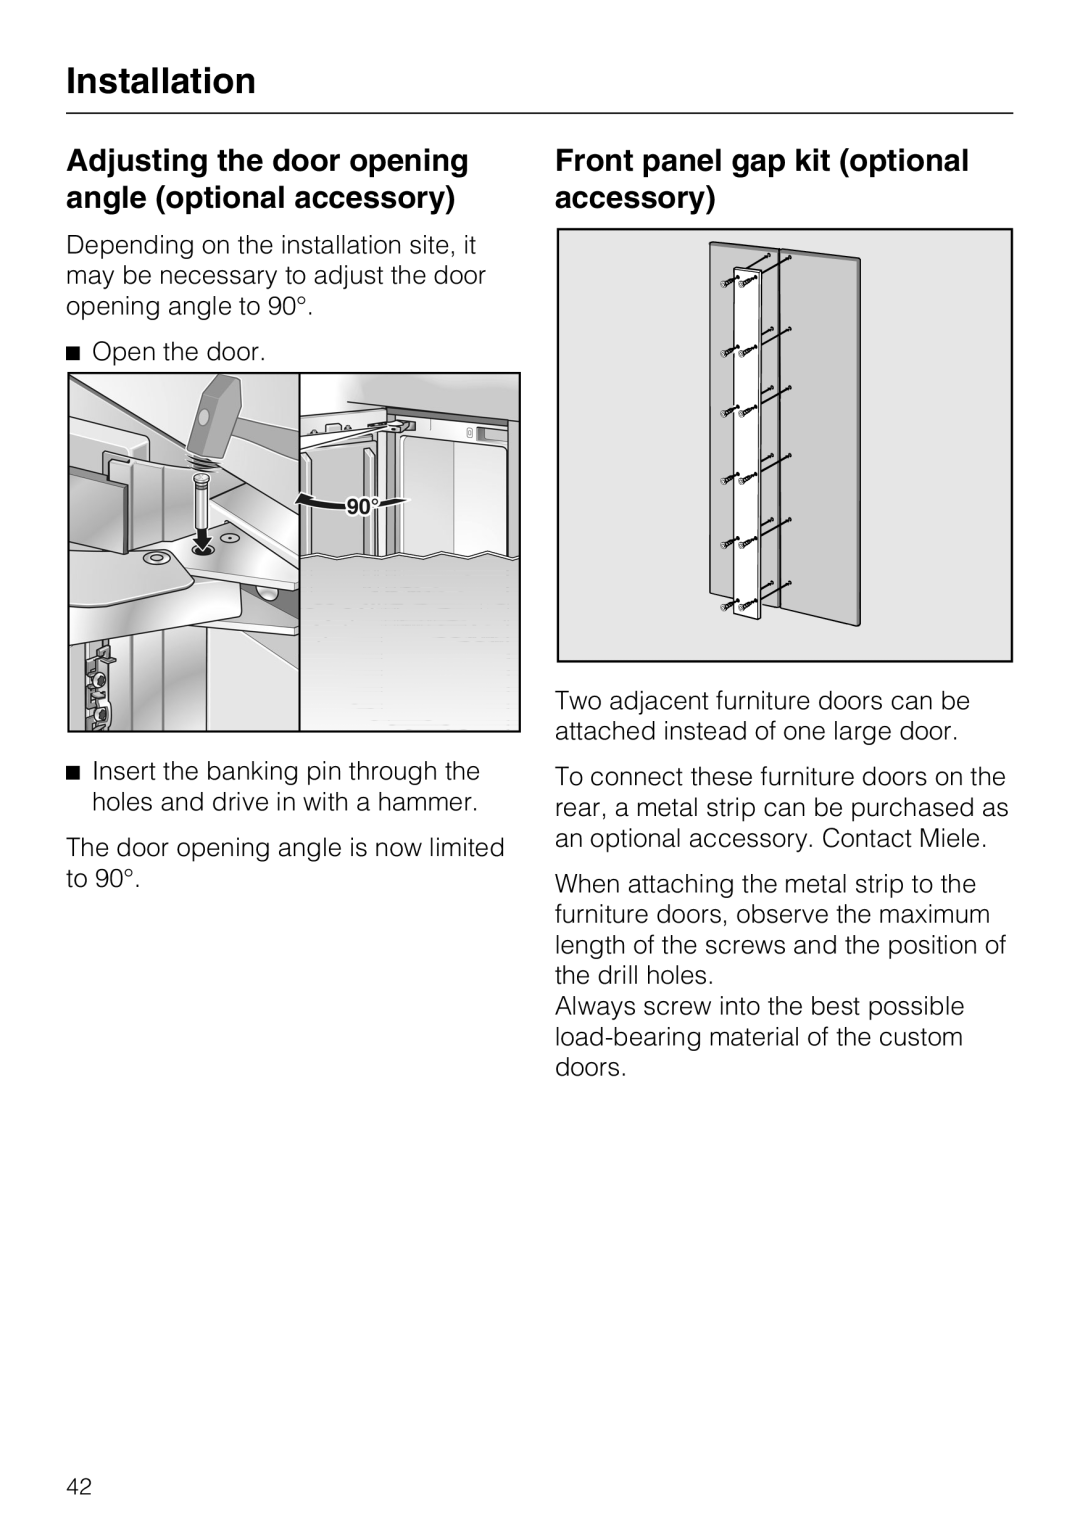 Miele 09 920 570 installation instructions Front panel gap kit optional accessory, Installation 